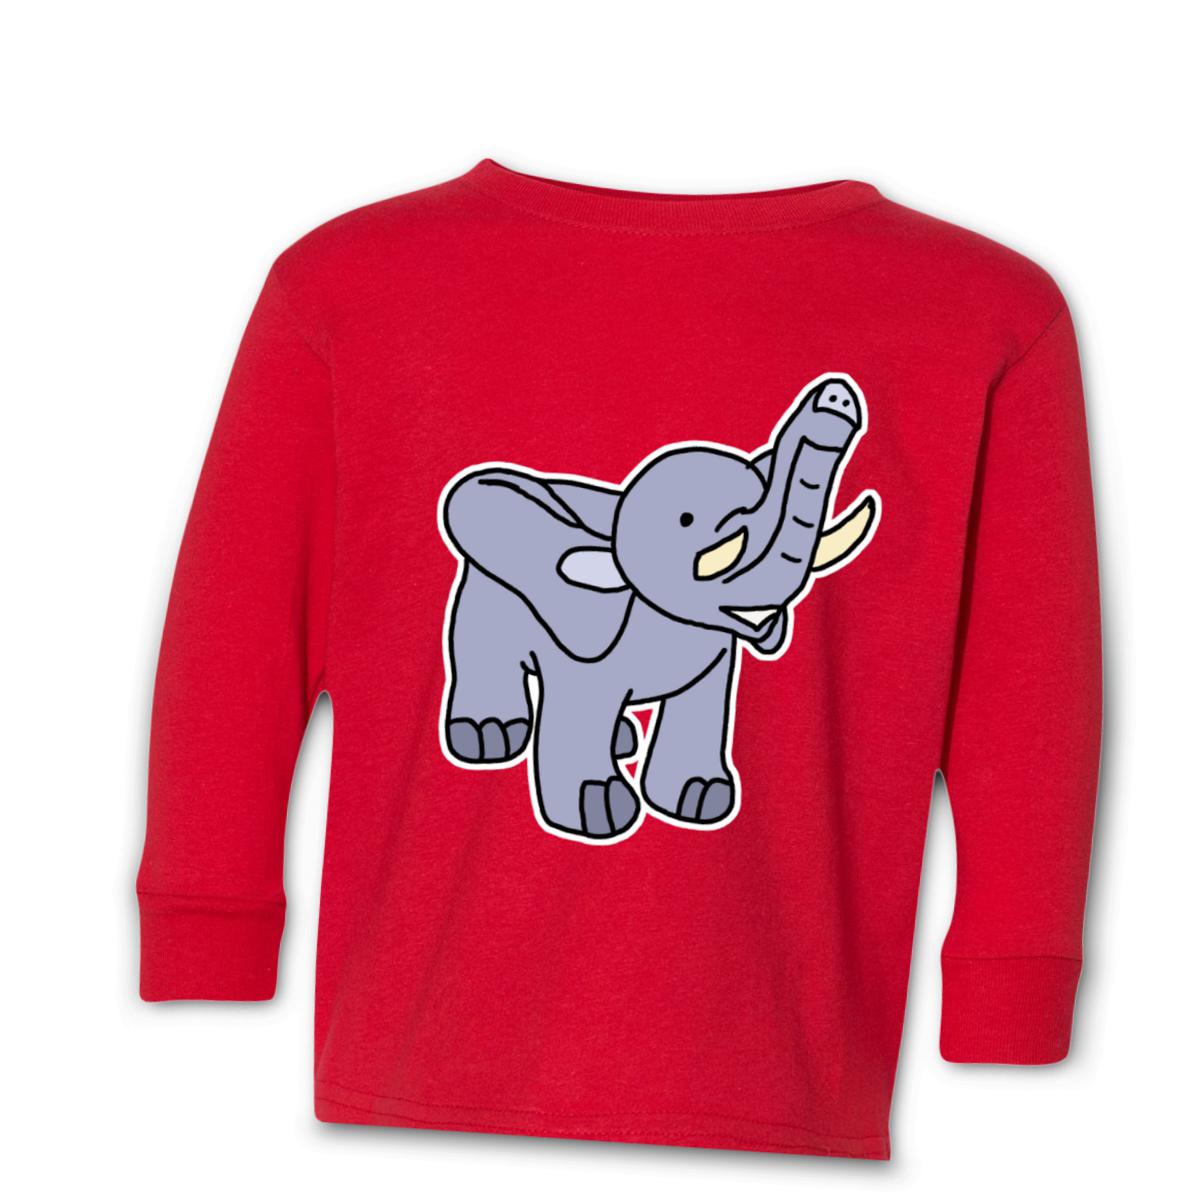 Toy Elephant Kid's Long Sleeve Tee Large red